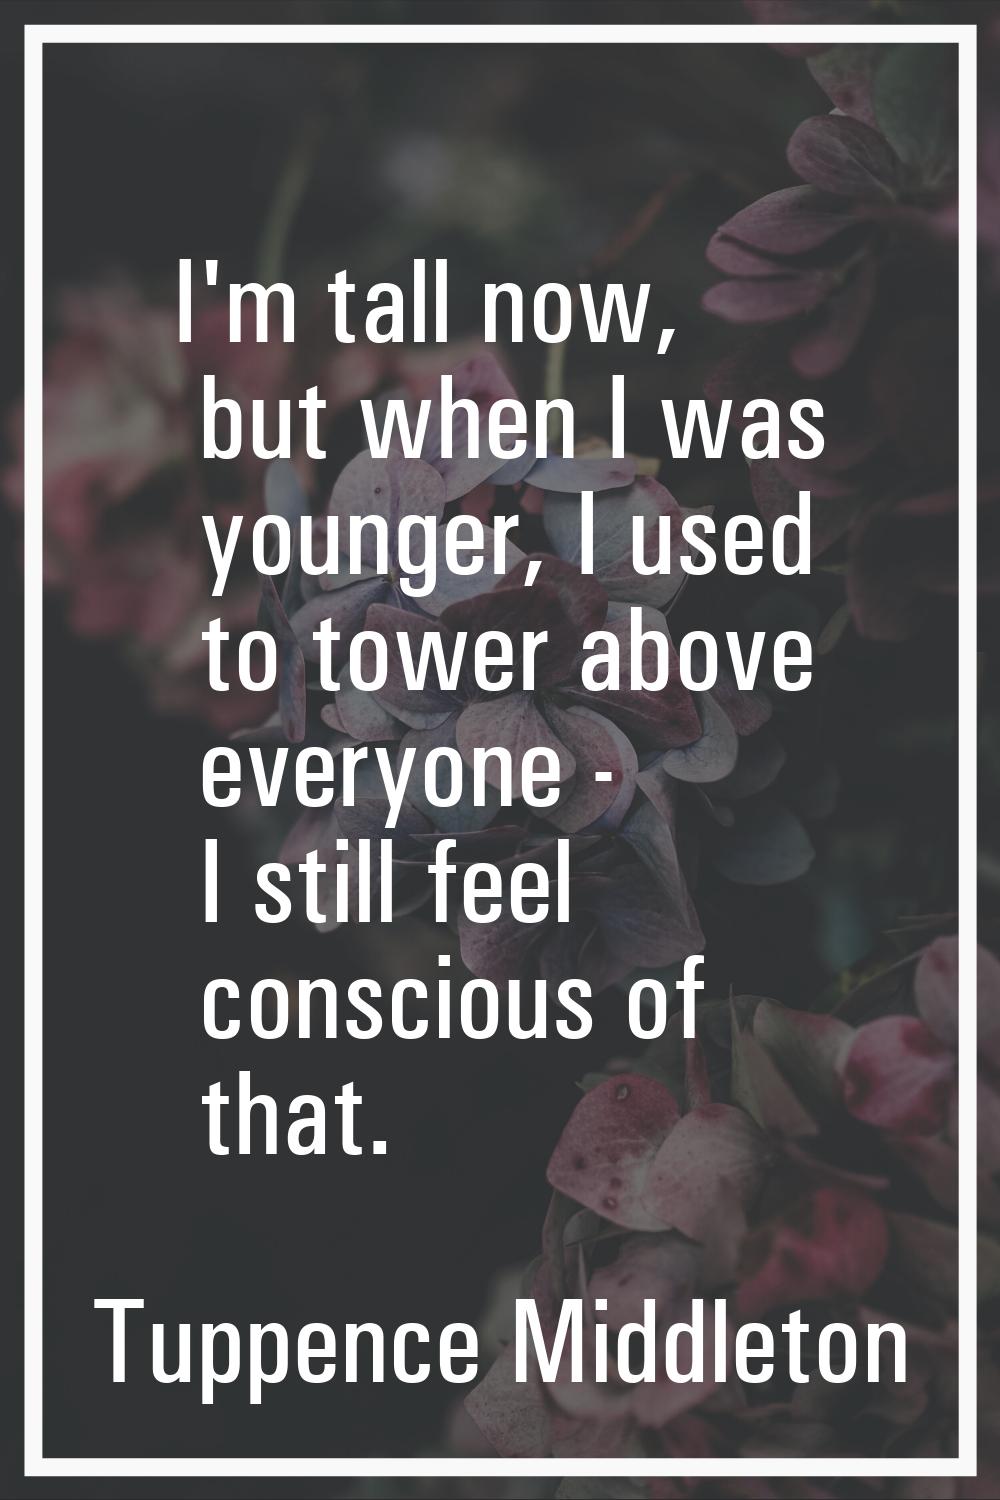 I'm tall now, but when I was younger, I used to tower above everyone - I still feel conscious of th